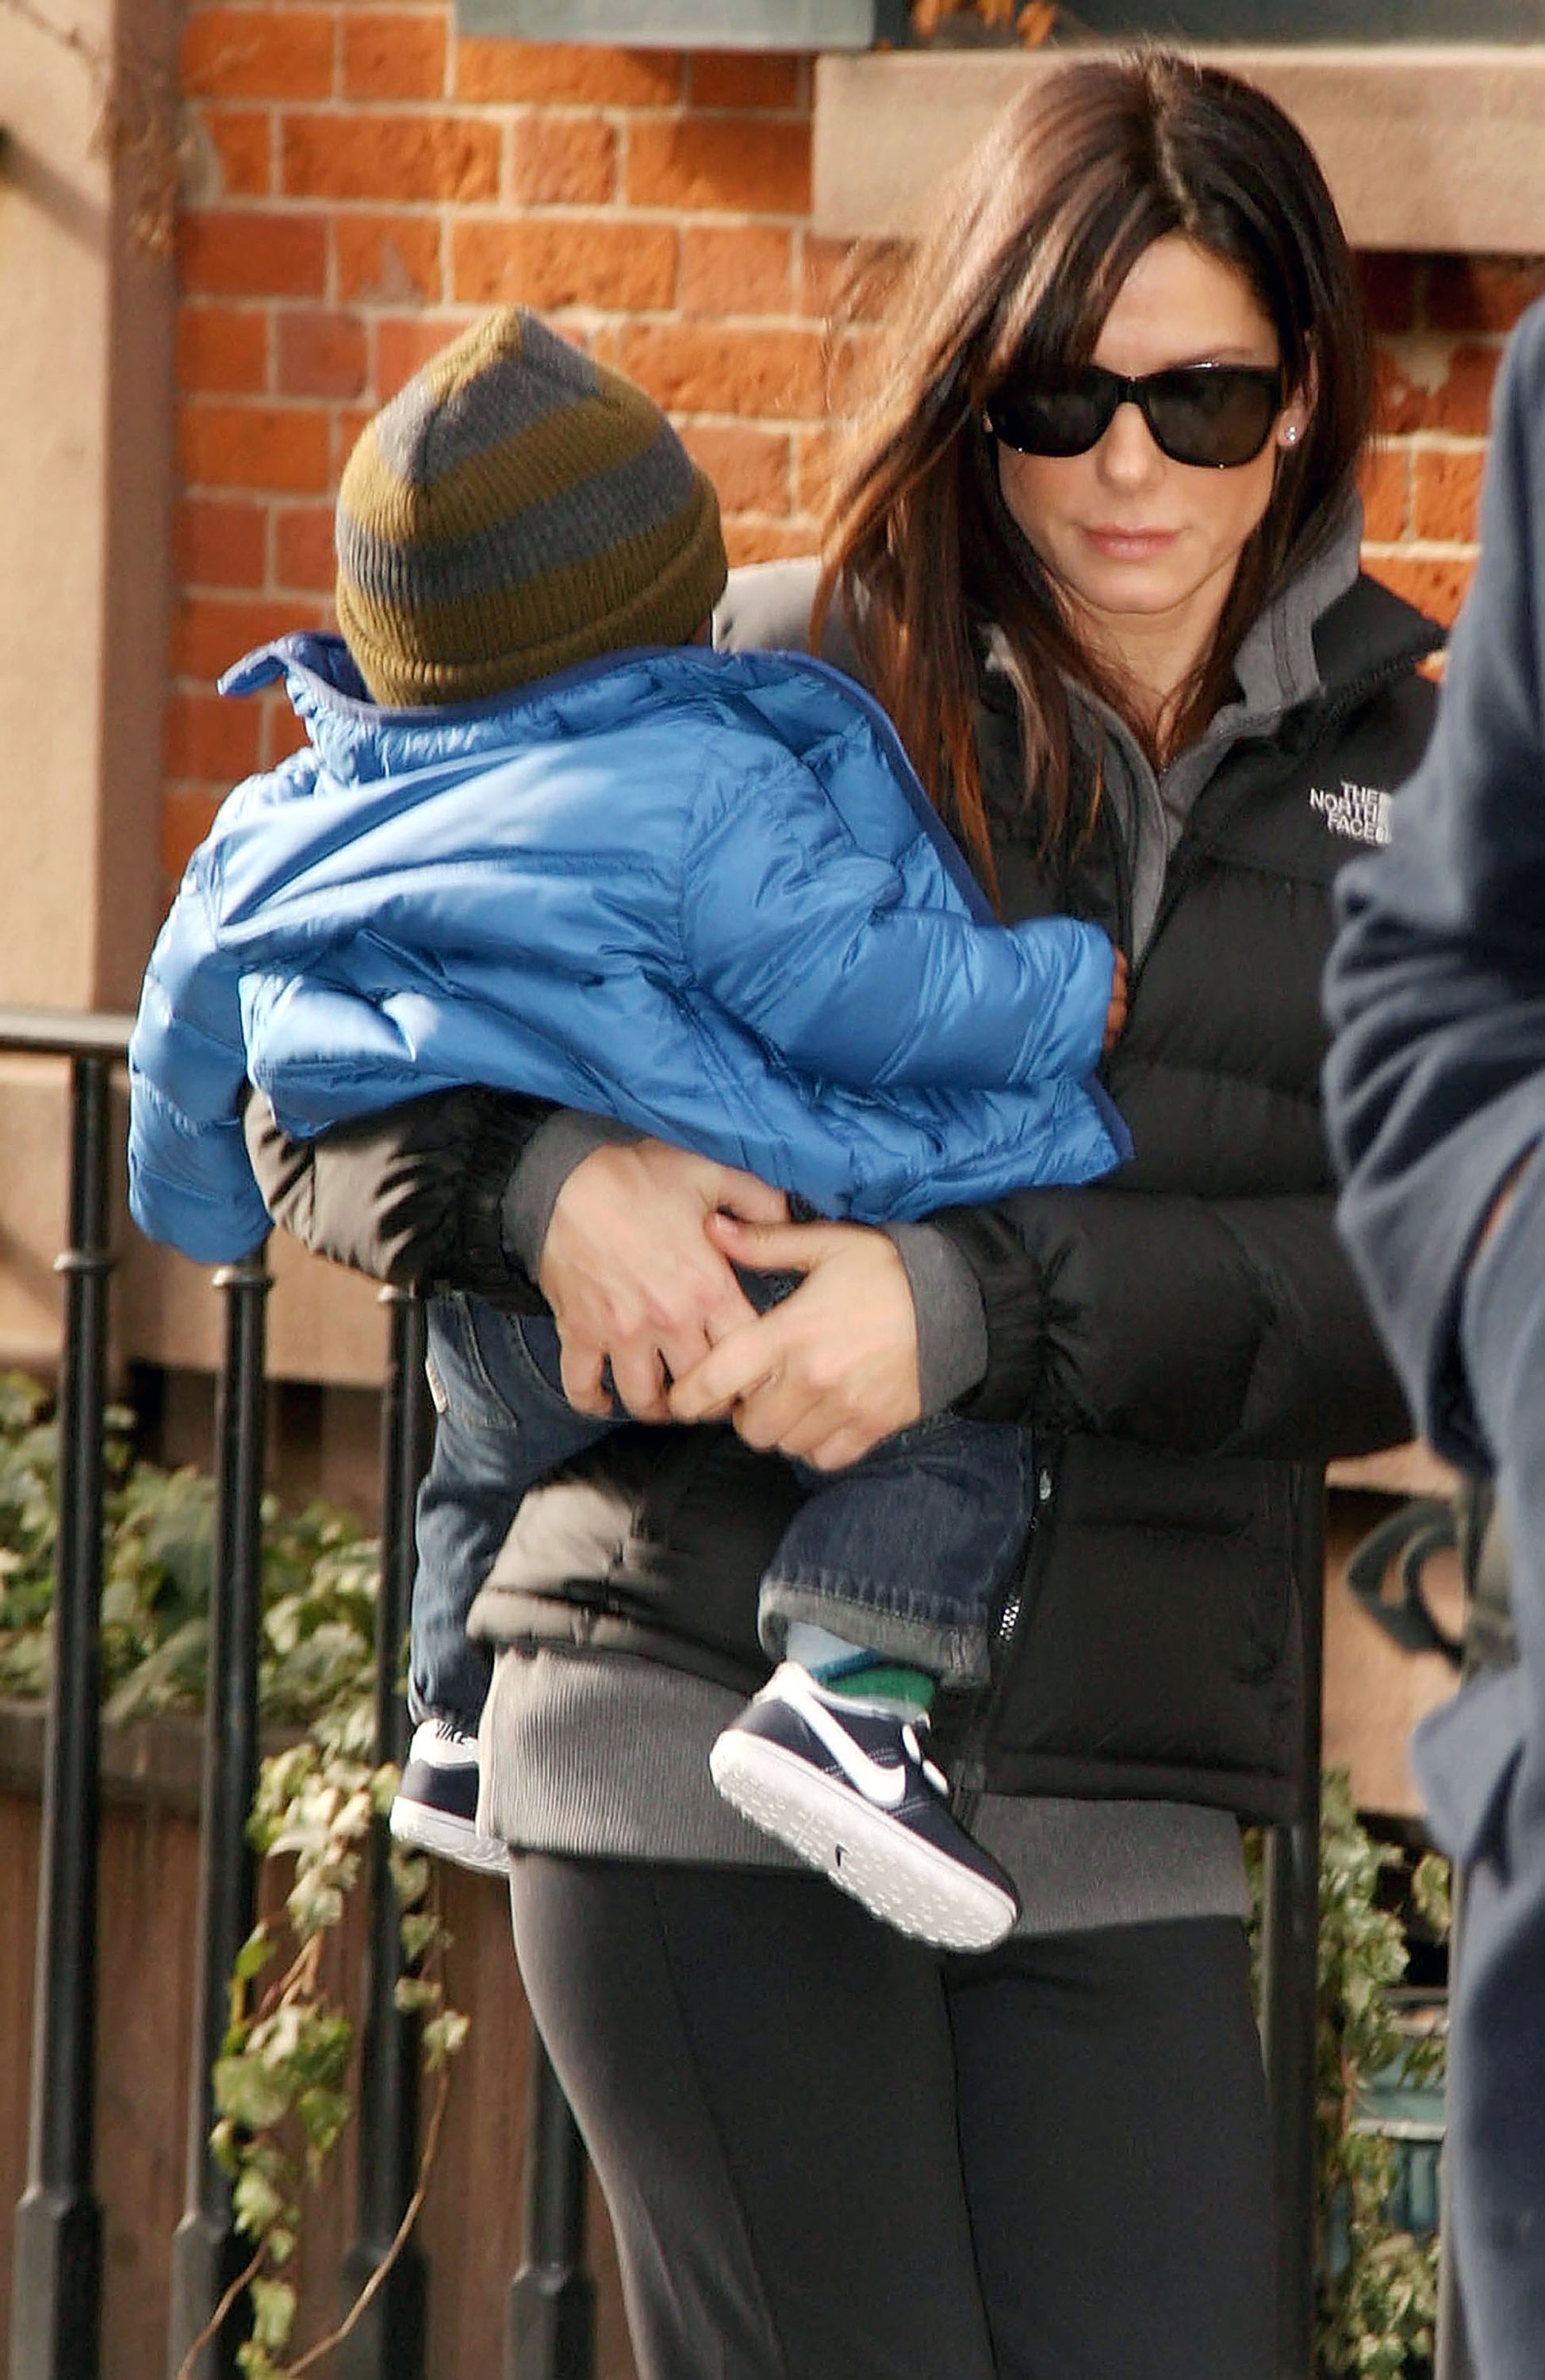 Sandra Bullock is seen carrying her son, Louis Bardo Bullock, on January 20, 2011, in New York City | Source: Getty Images